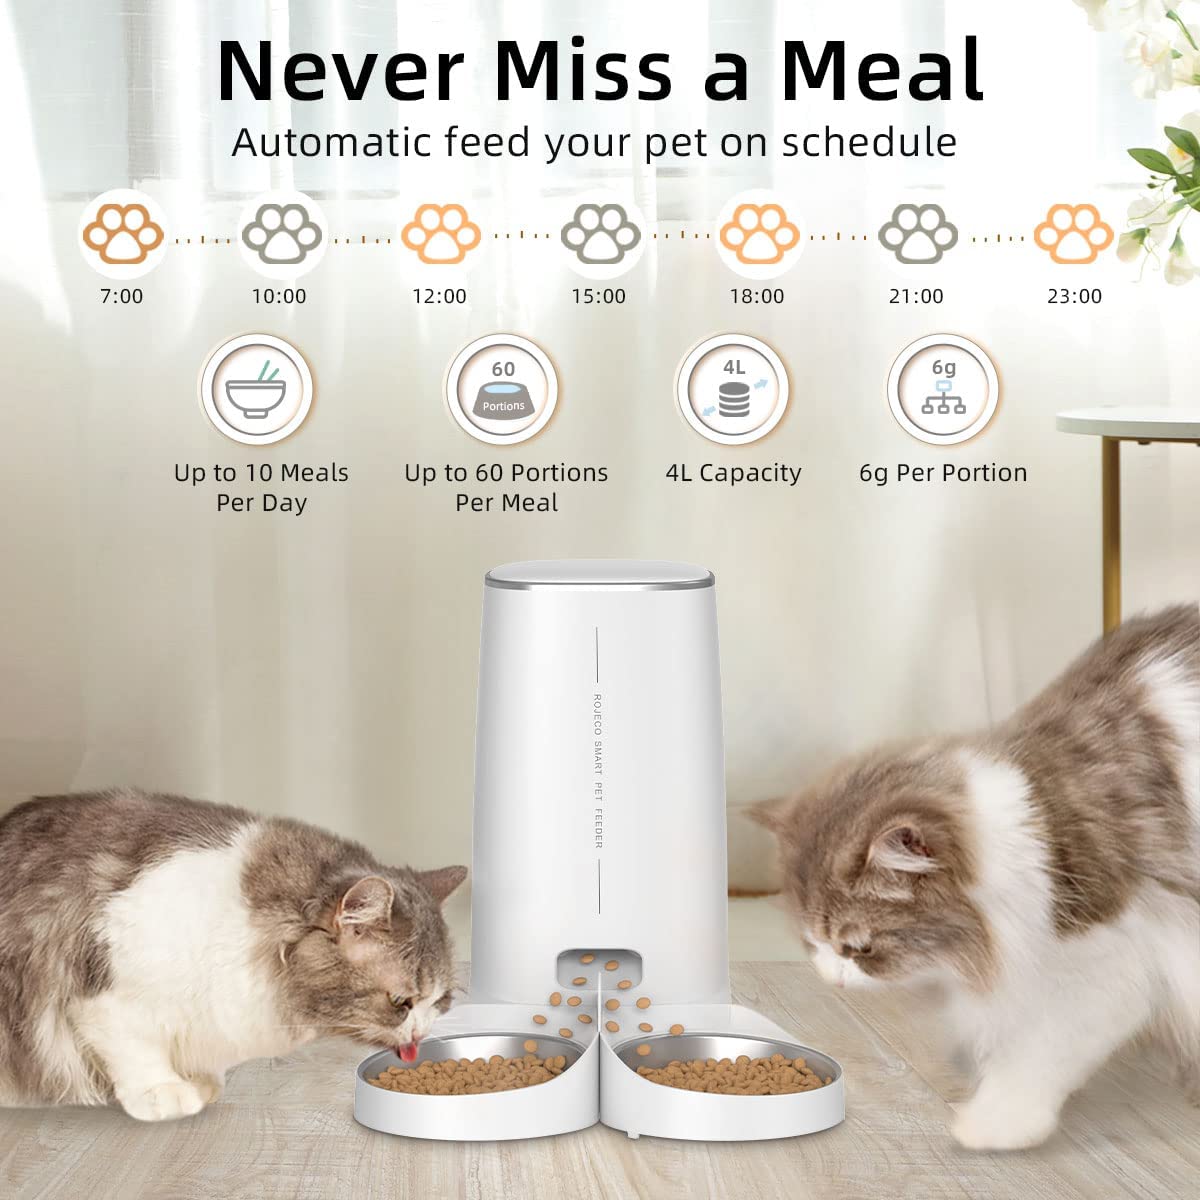 ROJECO WiFi Automatic Cat Feeder Pet Smart Cat Food Kibble Dispenser Remote Control Auto Feeder For Cat Dog Dry Food